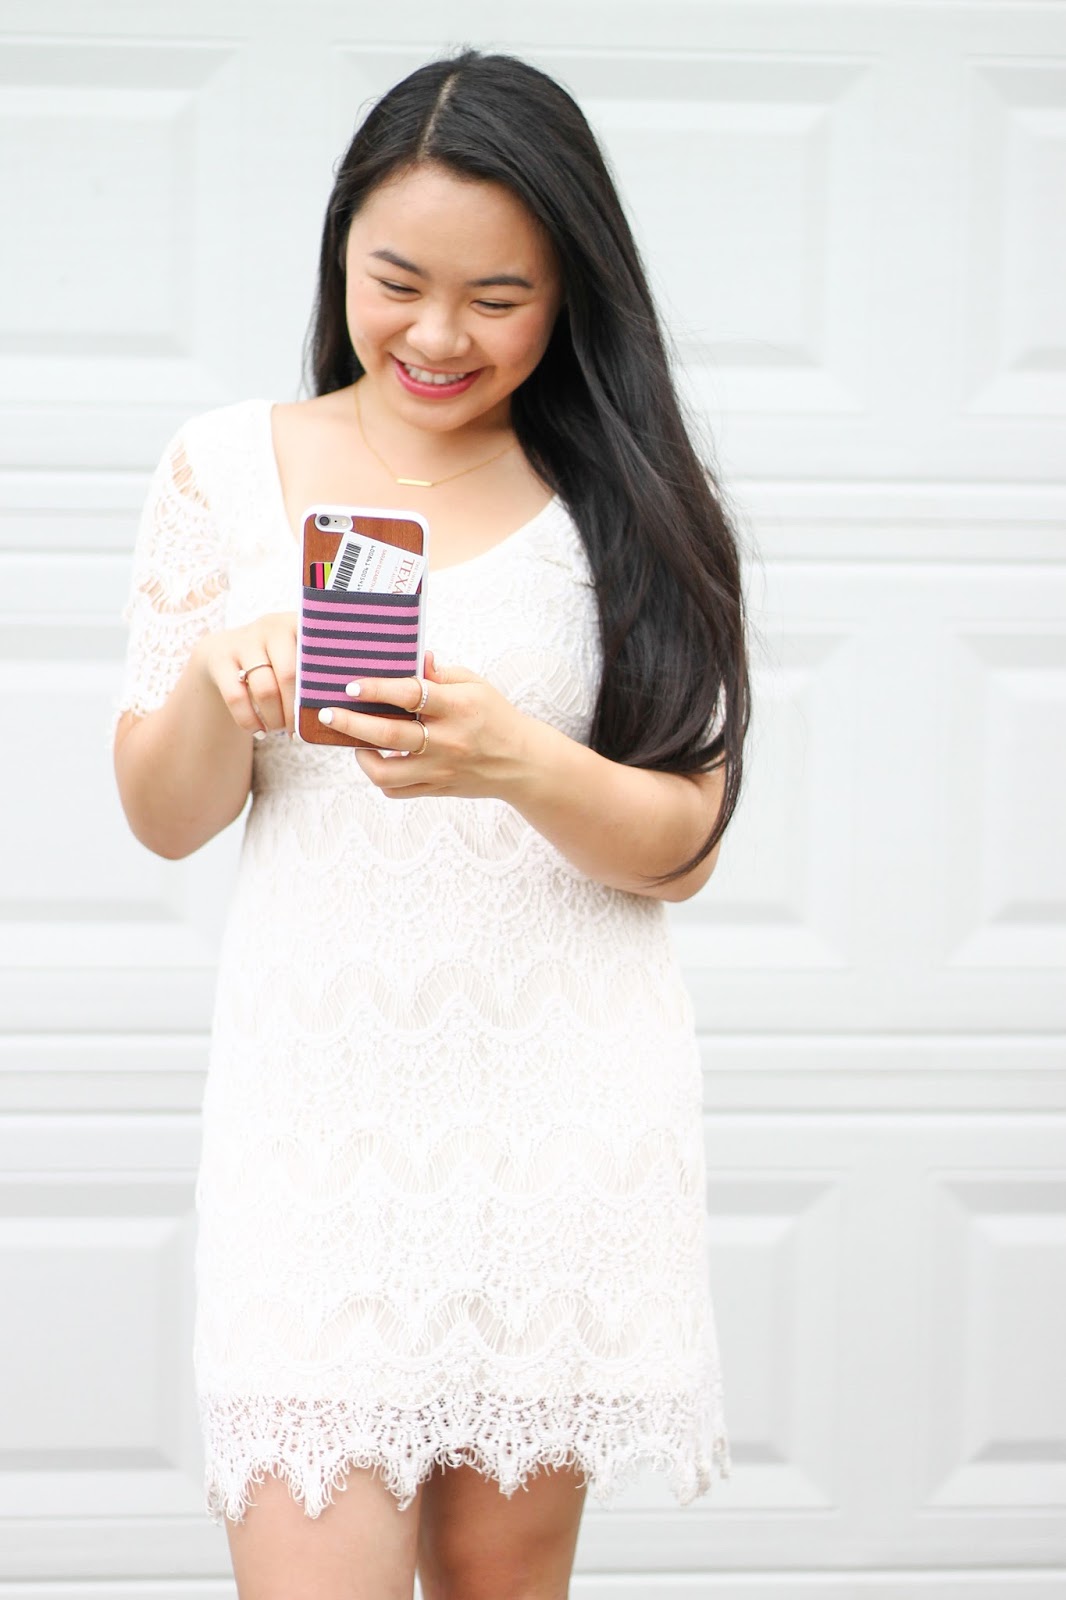 The Best Phone Case for College: jimmyCASE | www.thebellainsider.com